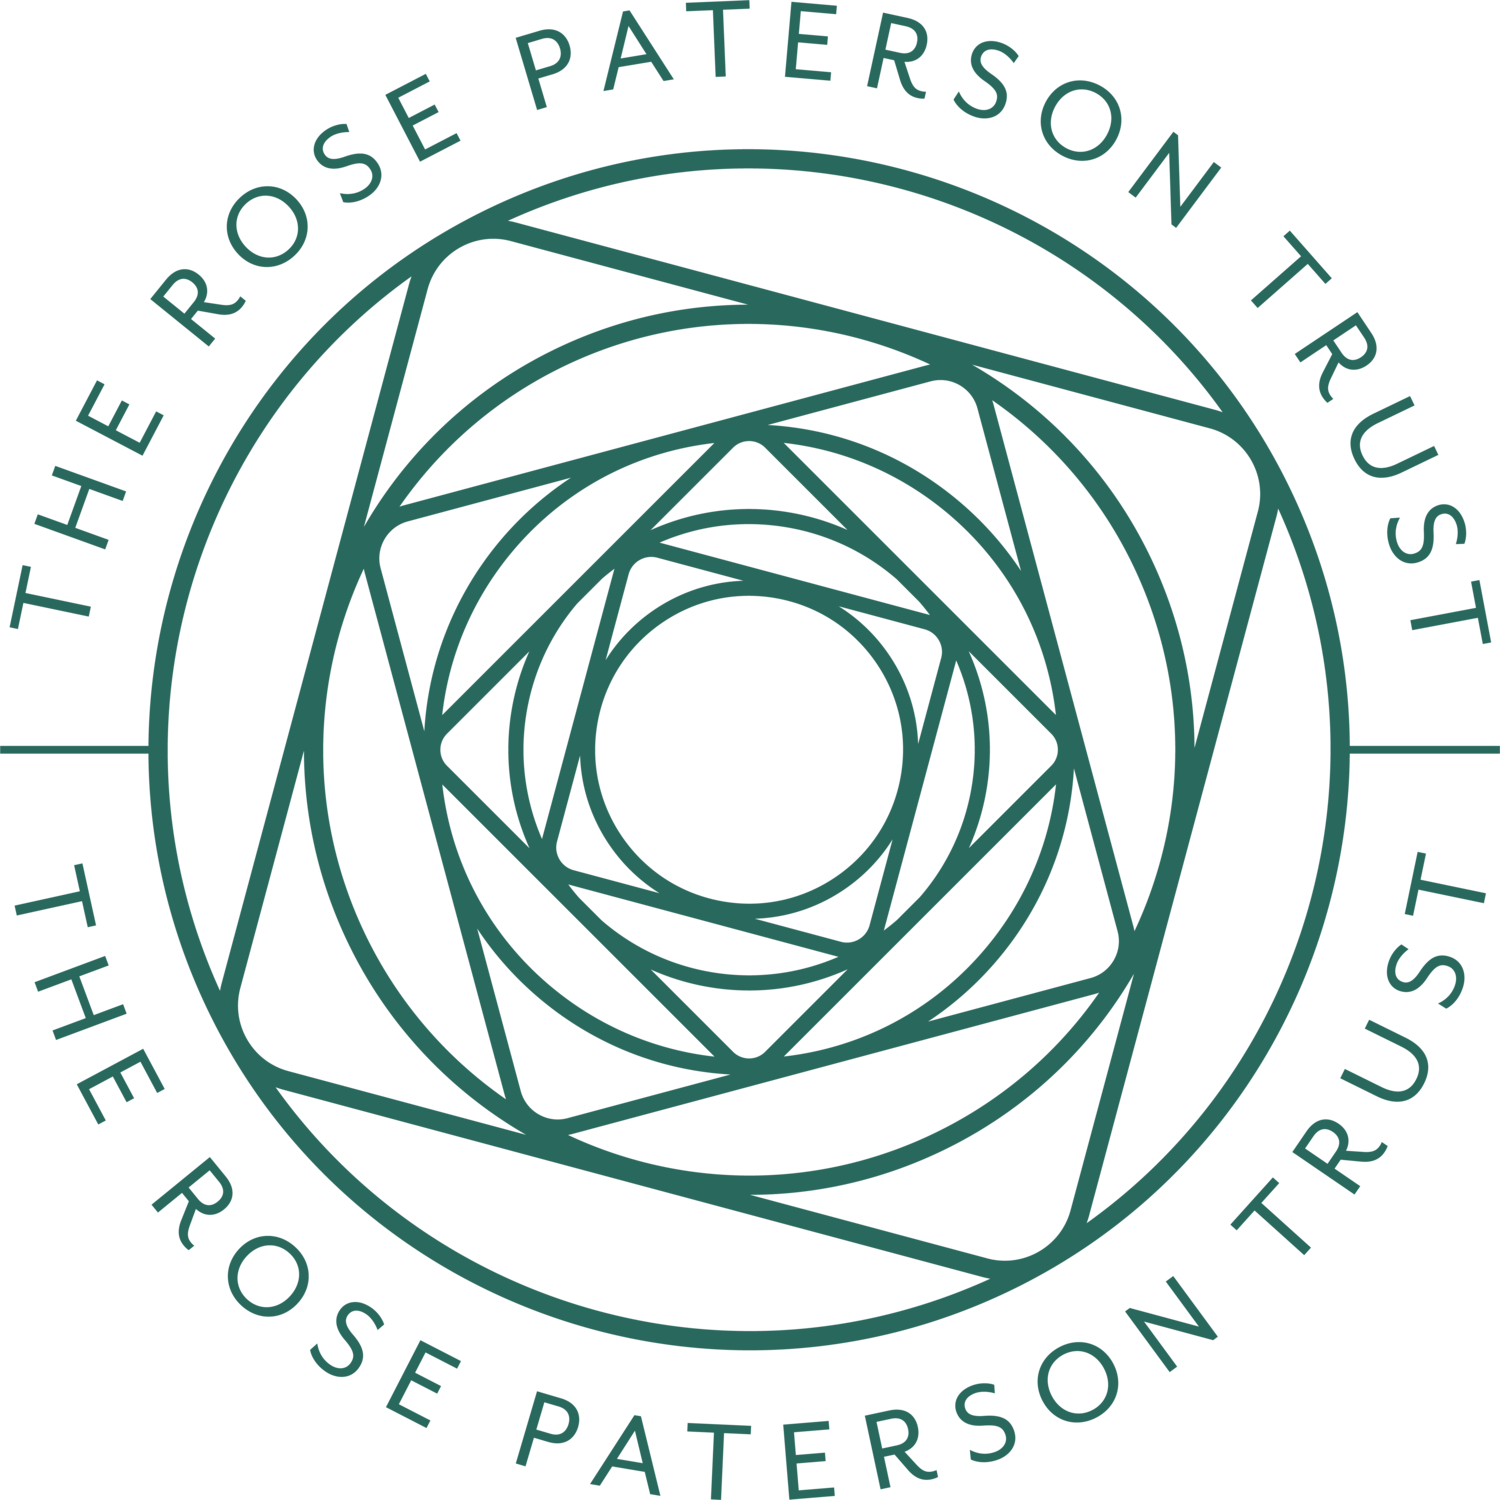 The Rose Paterson Trust